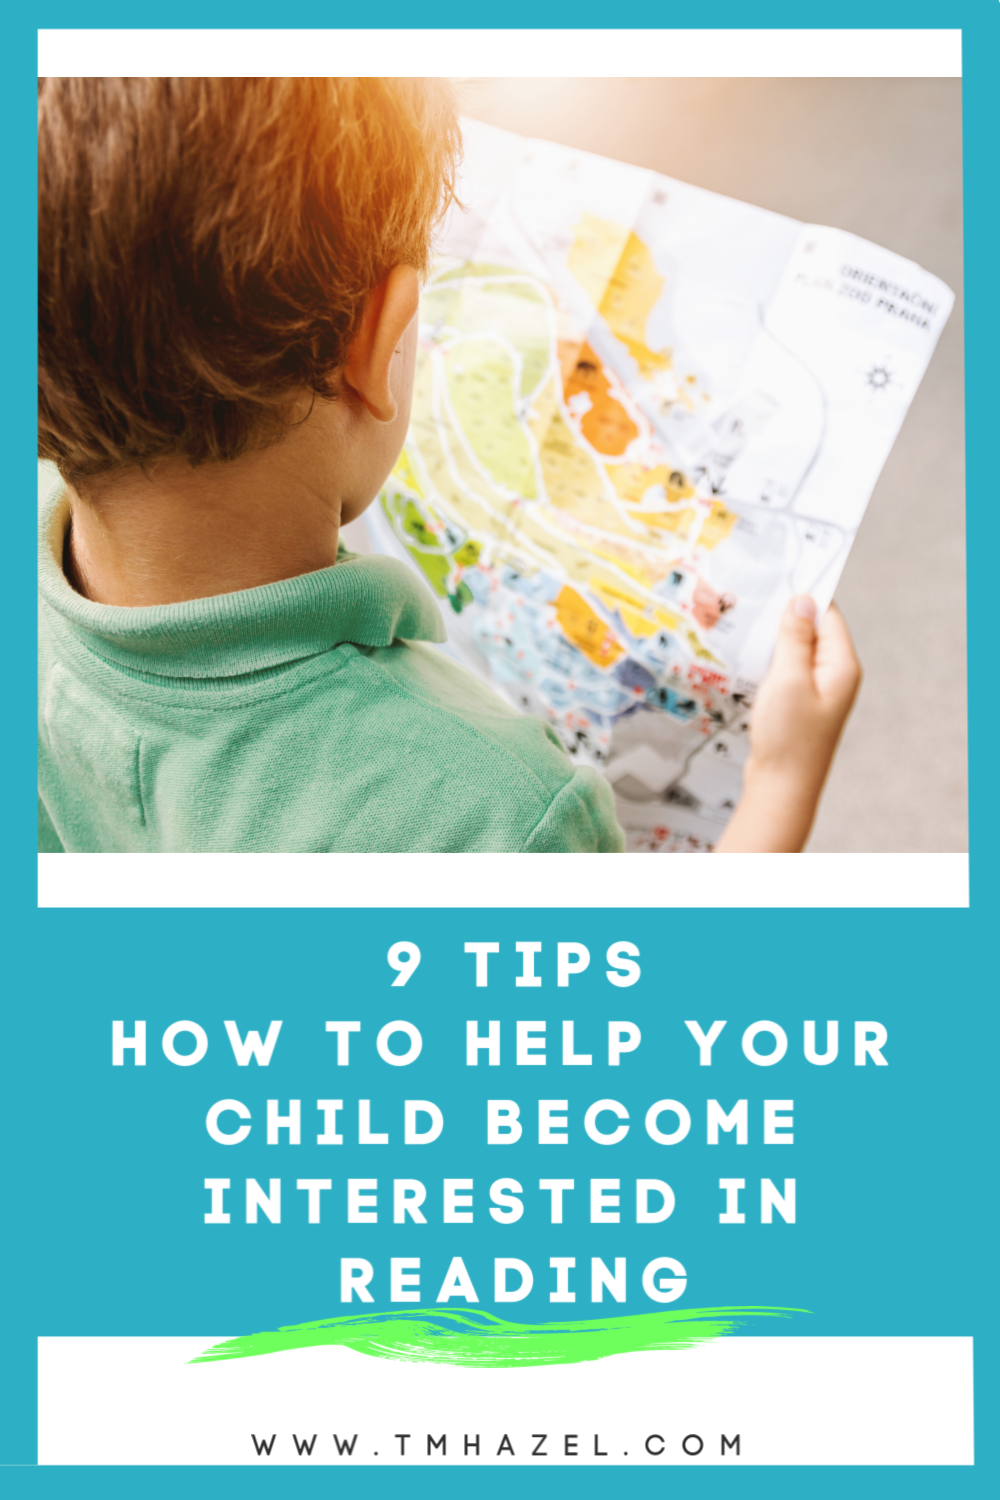 9 TIPS How To HELP YOUR CHILD INTERESTED IN READING